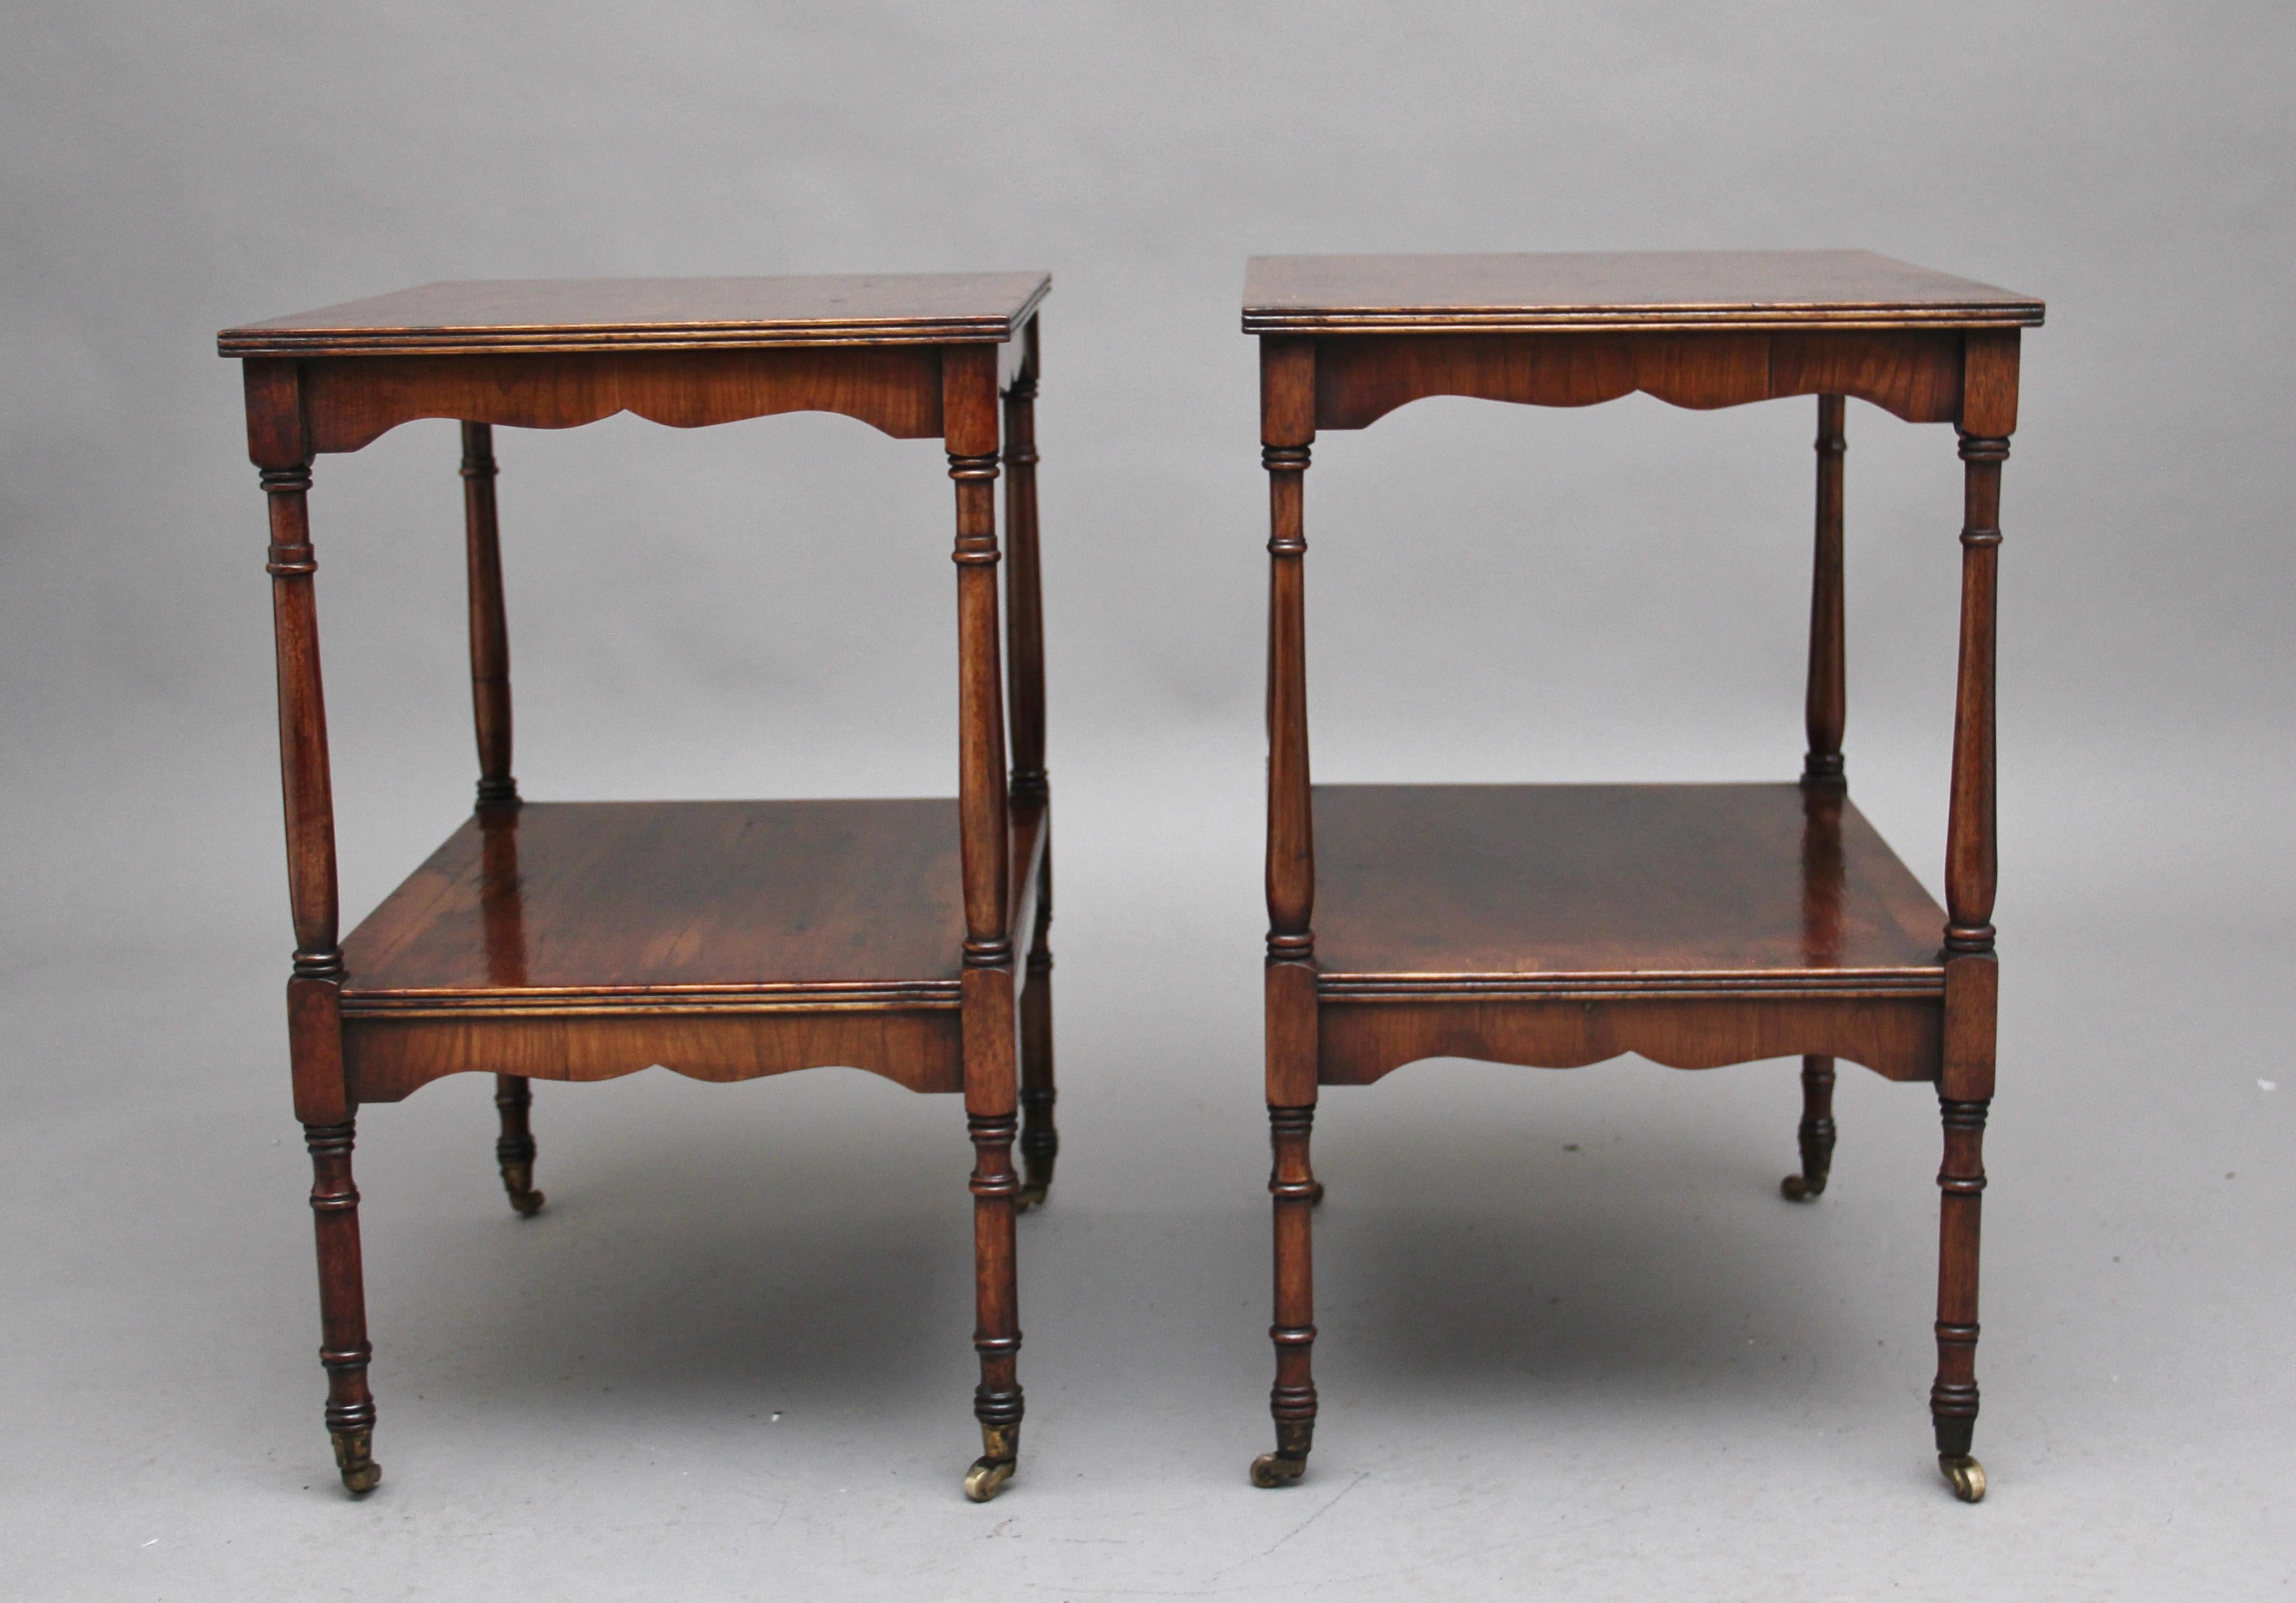 A pair of 20th century two tier yew wood occasional tables, each tier having a reeded edge and shaped apron, elegant turned supports terminating on brass castors, circa 1940.
 